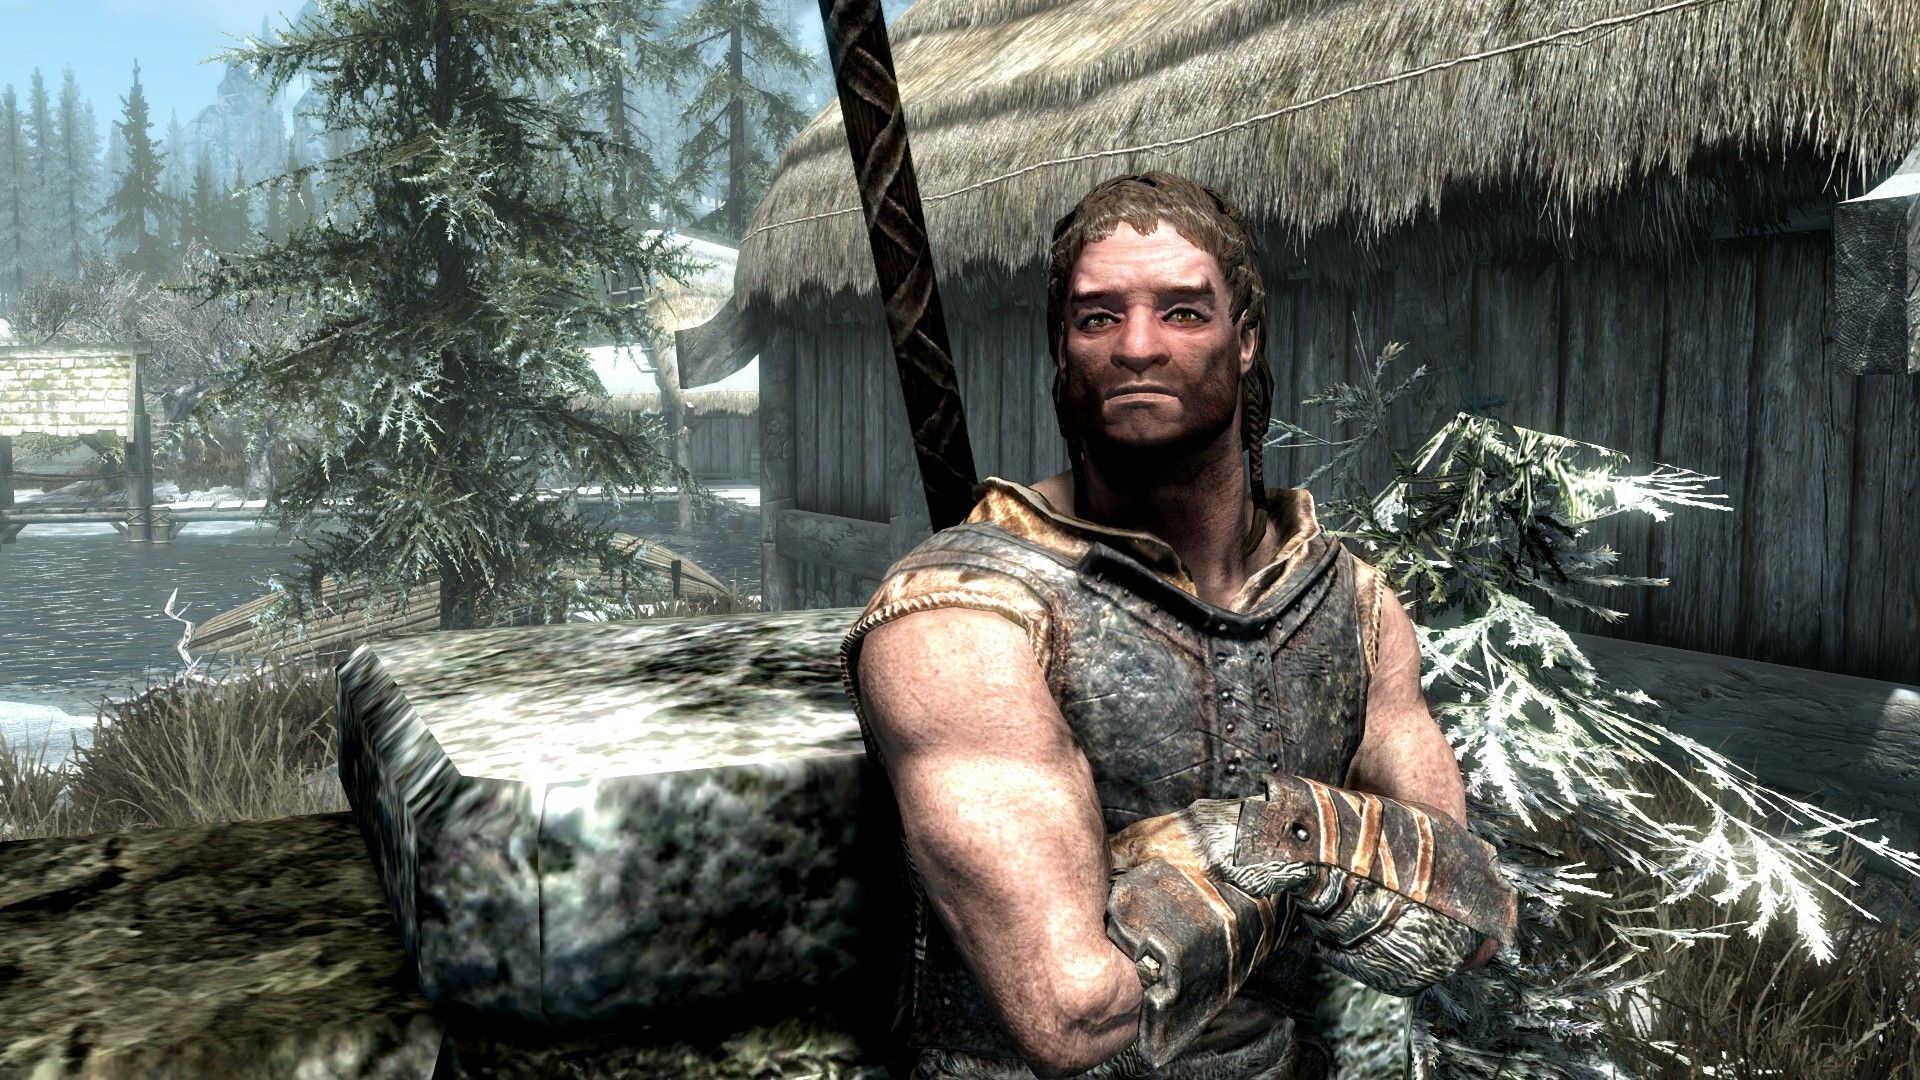 A muscular man with close-cropped hair leans against a stone fence with his arms crossed in an old town.